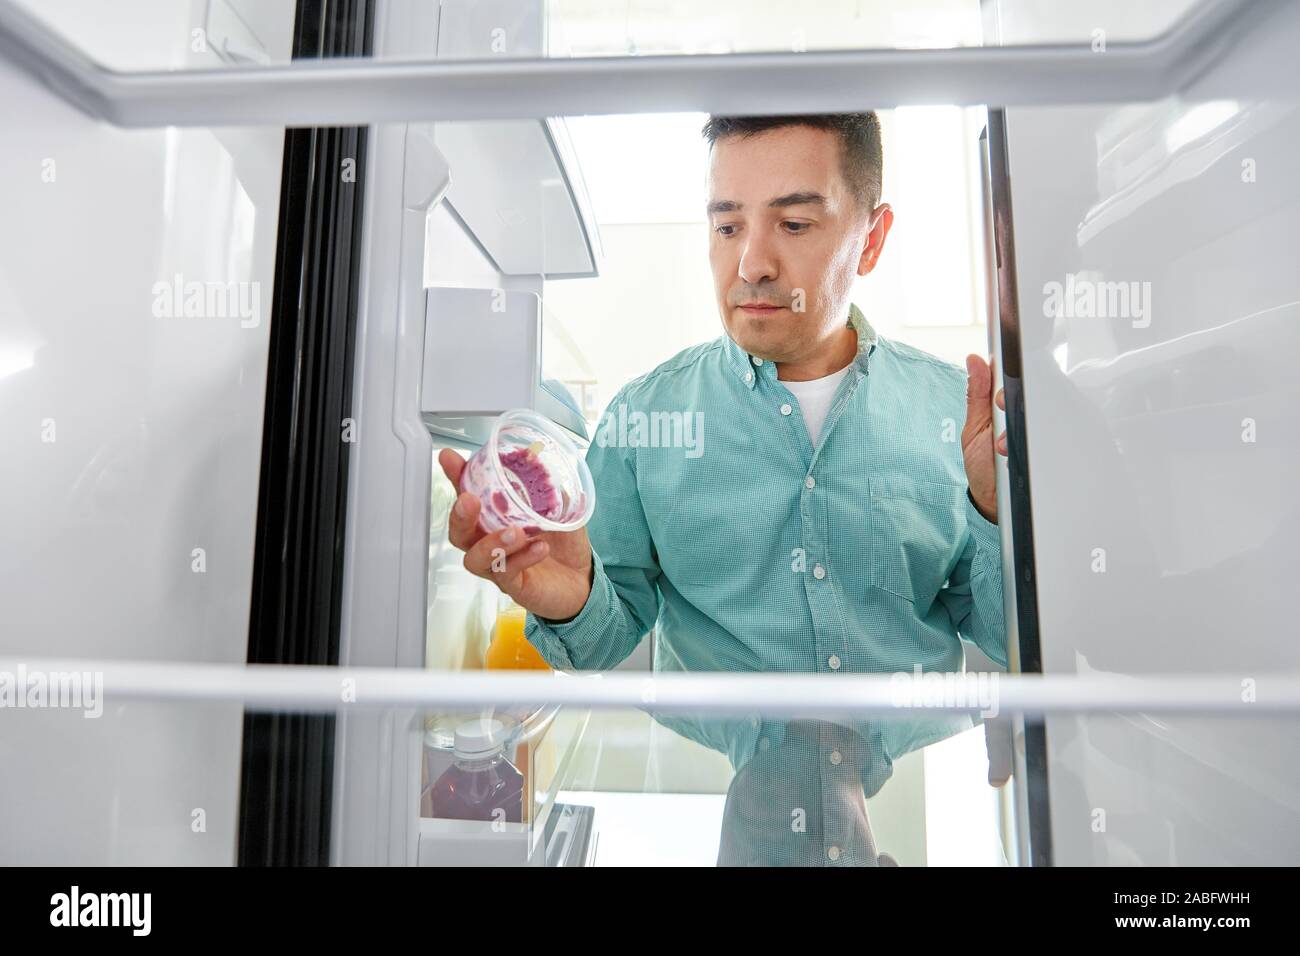 https://c8.alamy.com/comp/2ABFWHH/man-taking-empty-food-container-from-fridge-2ABFWHH.jpg